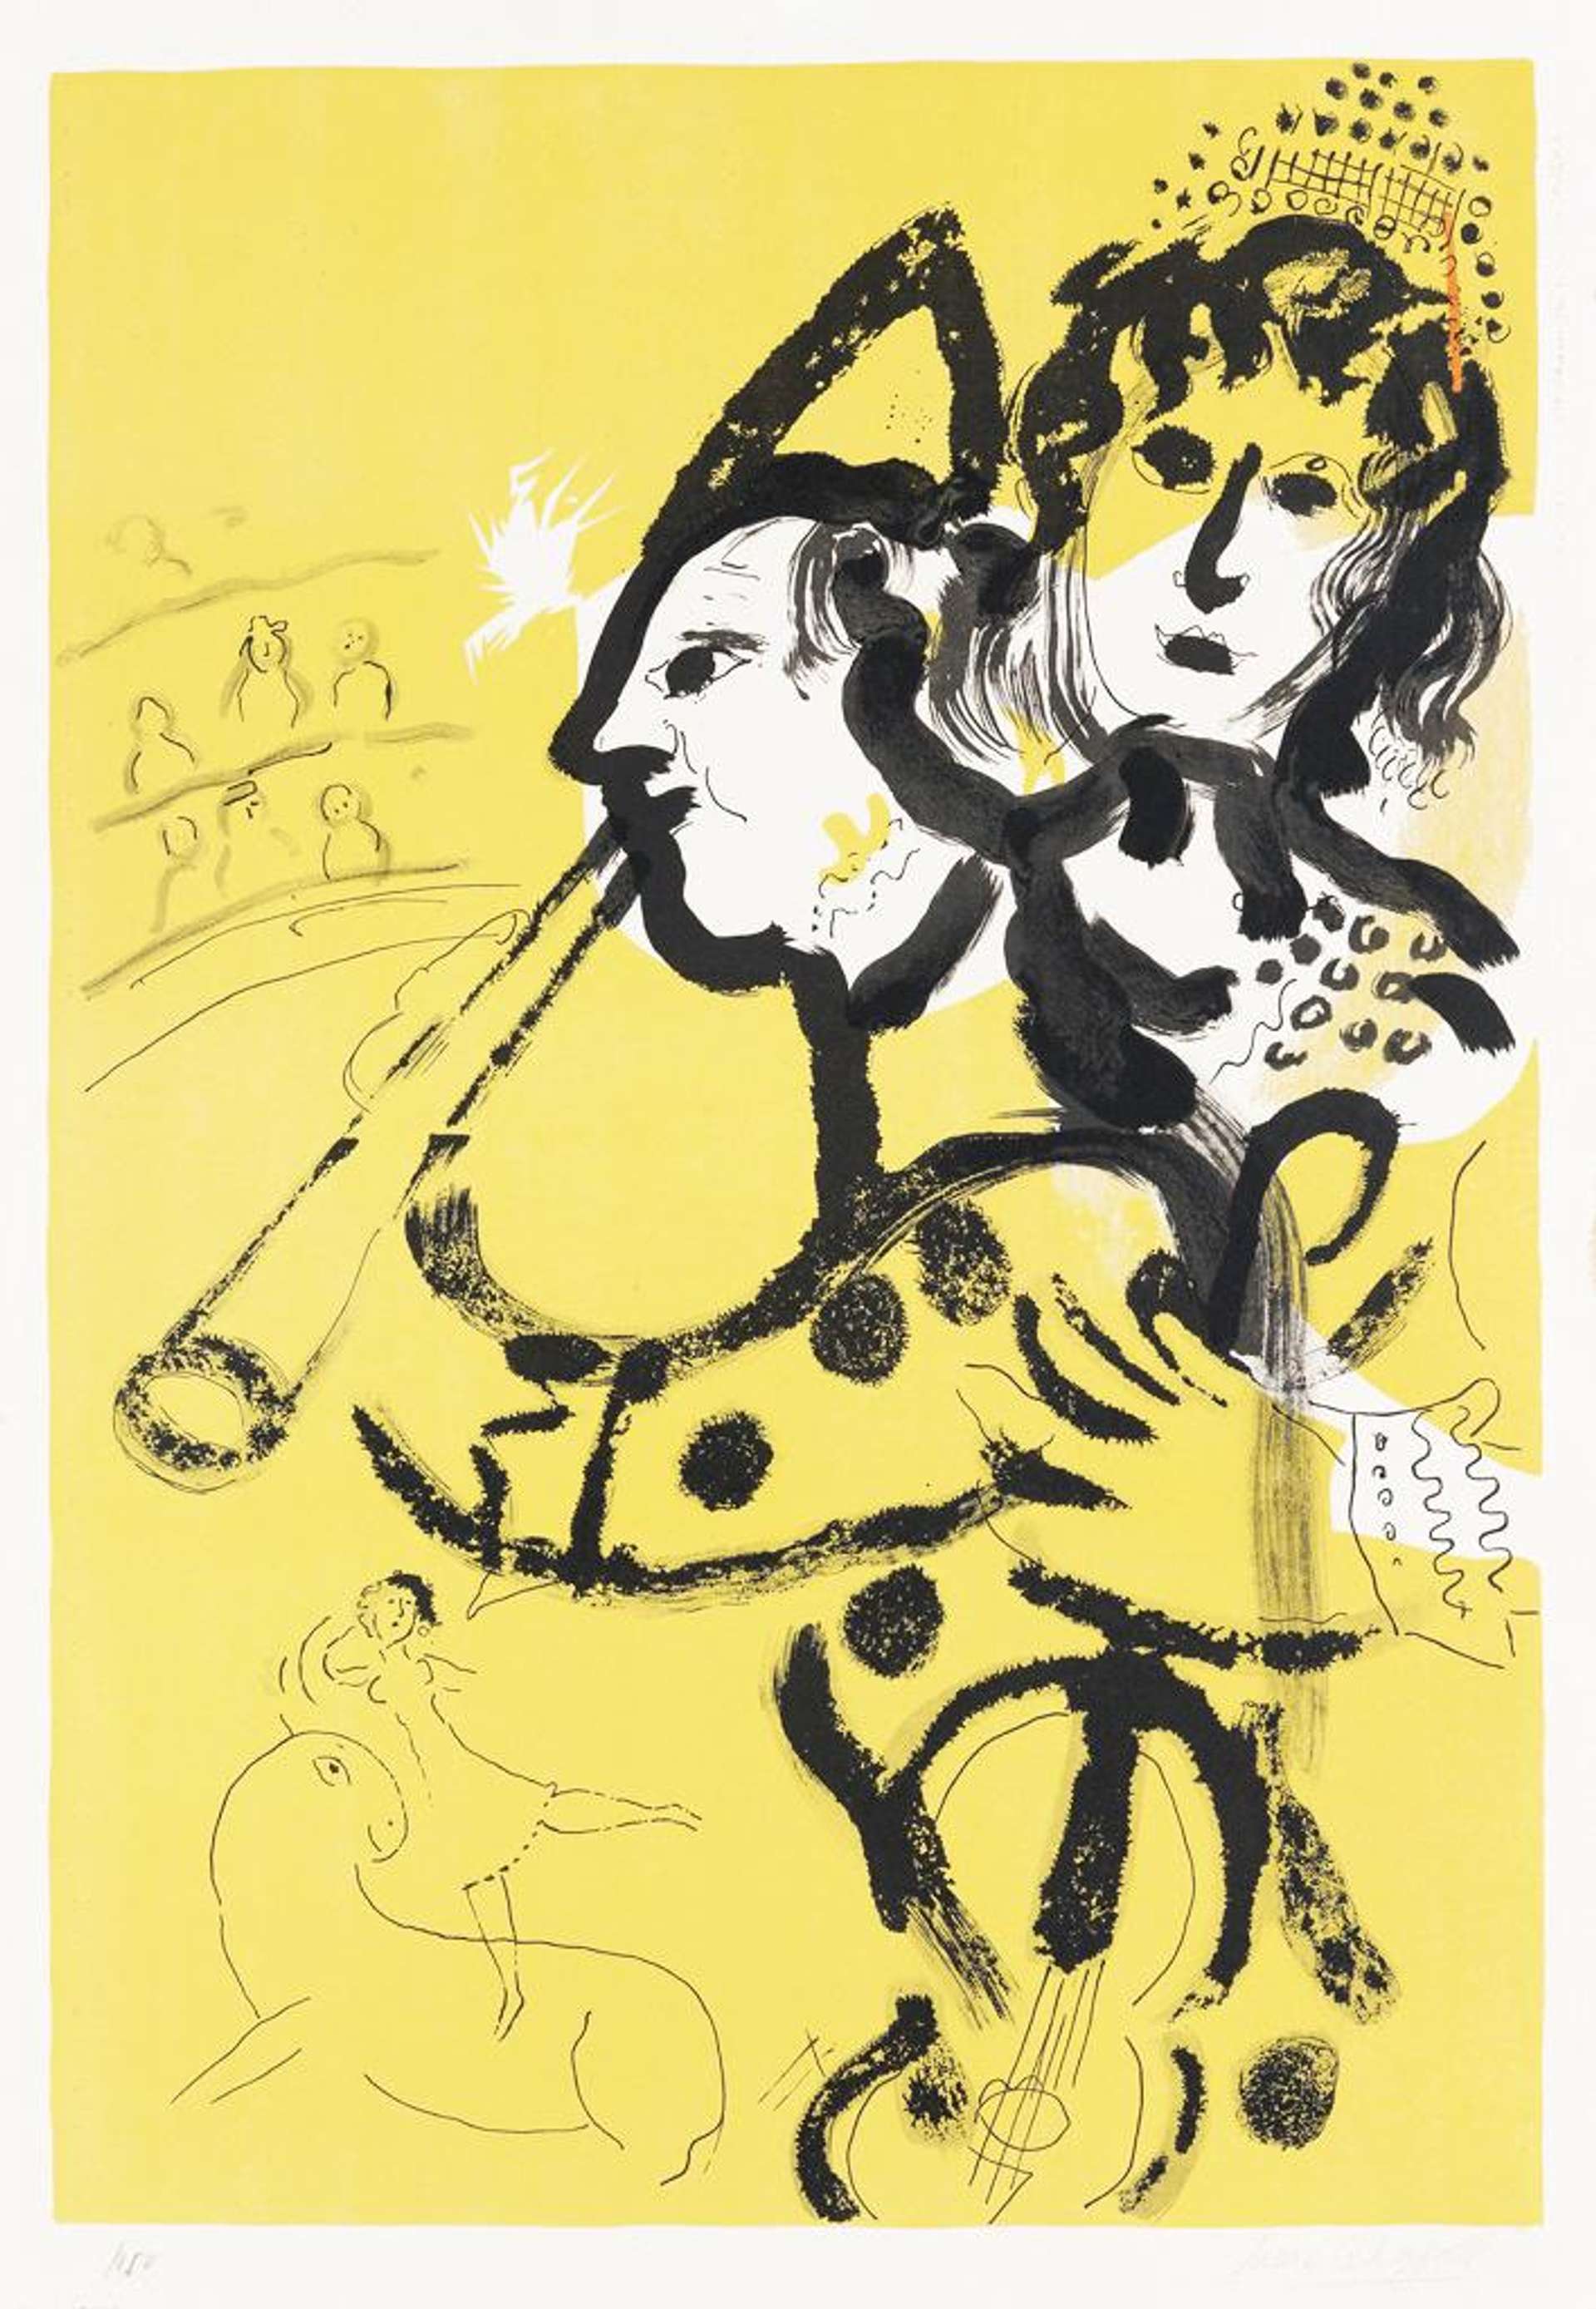 Le Clown Musicien - Signed Print by Marc Chagall 1957 - MyArtBroker